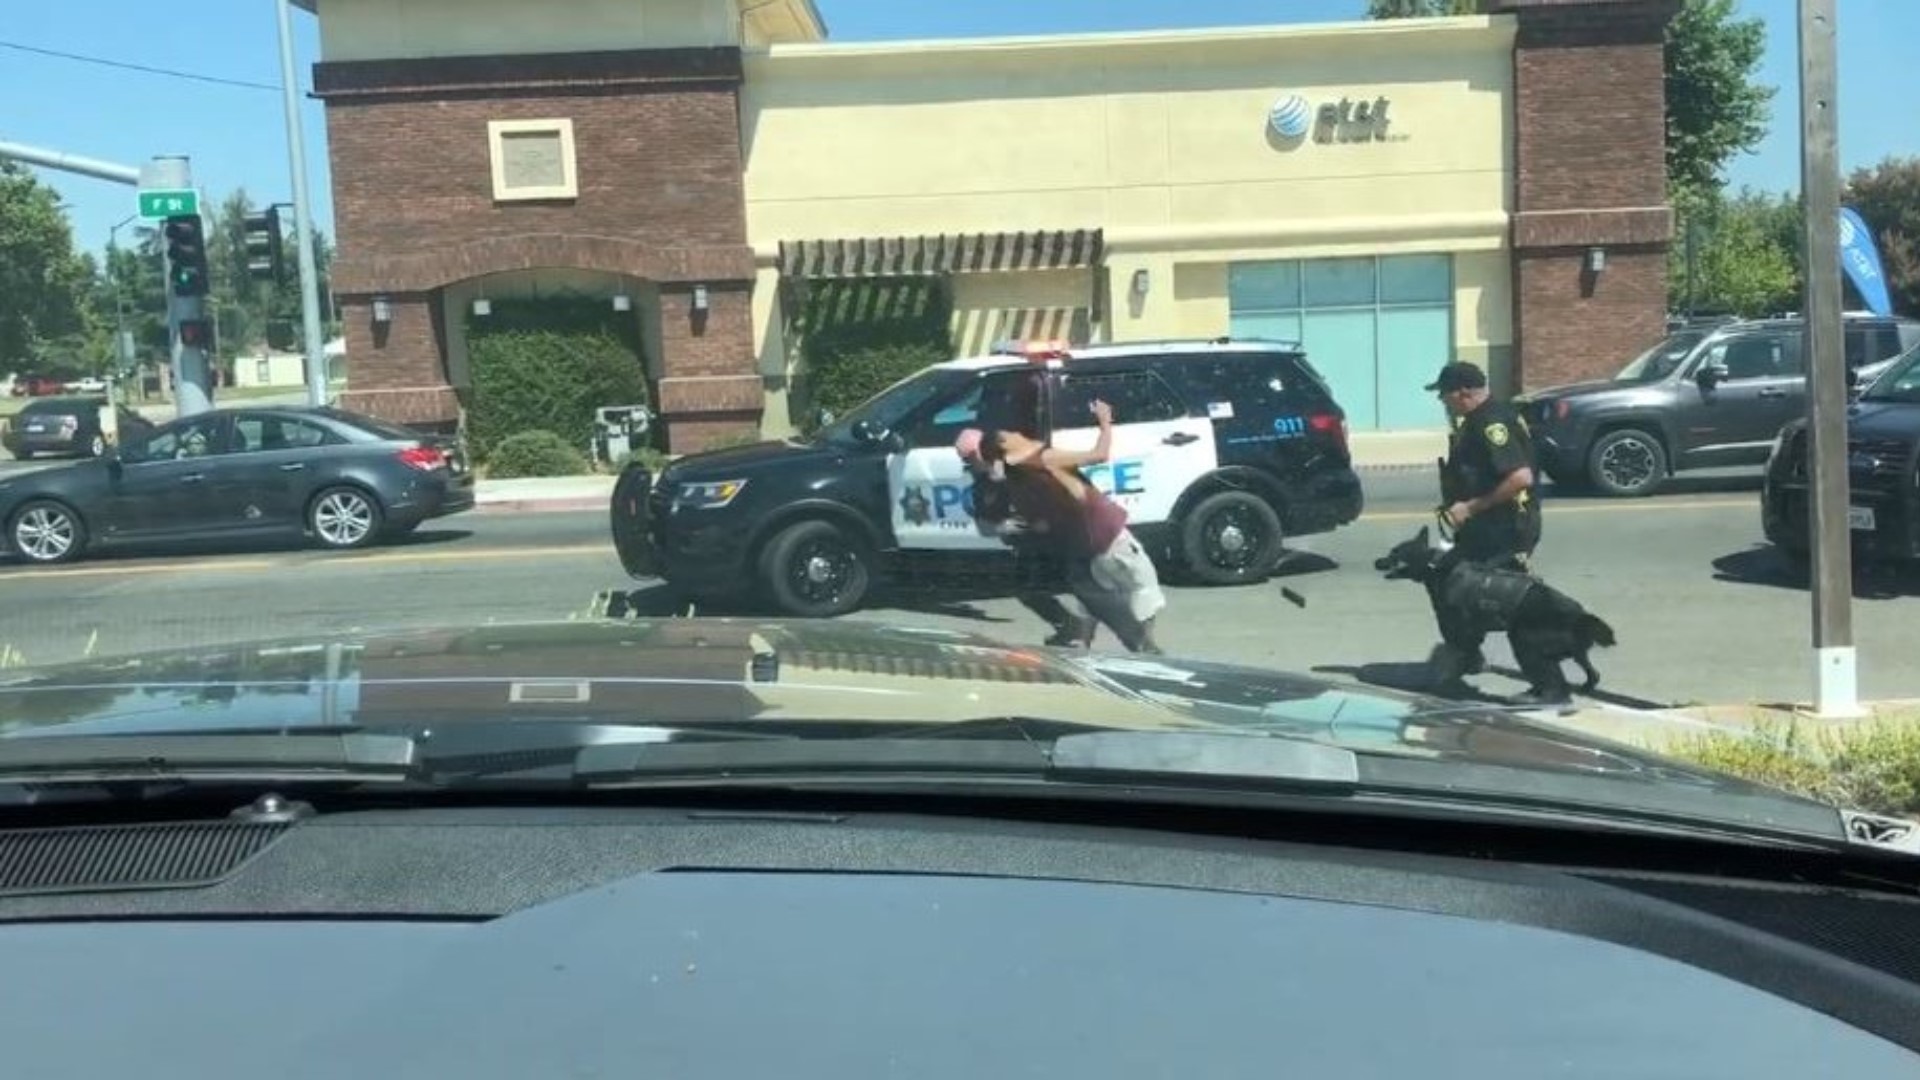 Cell phone video obtained by ABC10 appears to show one officer exit his patrol vehicle and "without any warning, 'clotheslined' [the man] across his neck area."